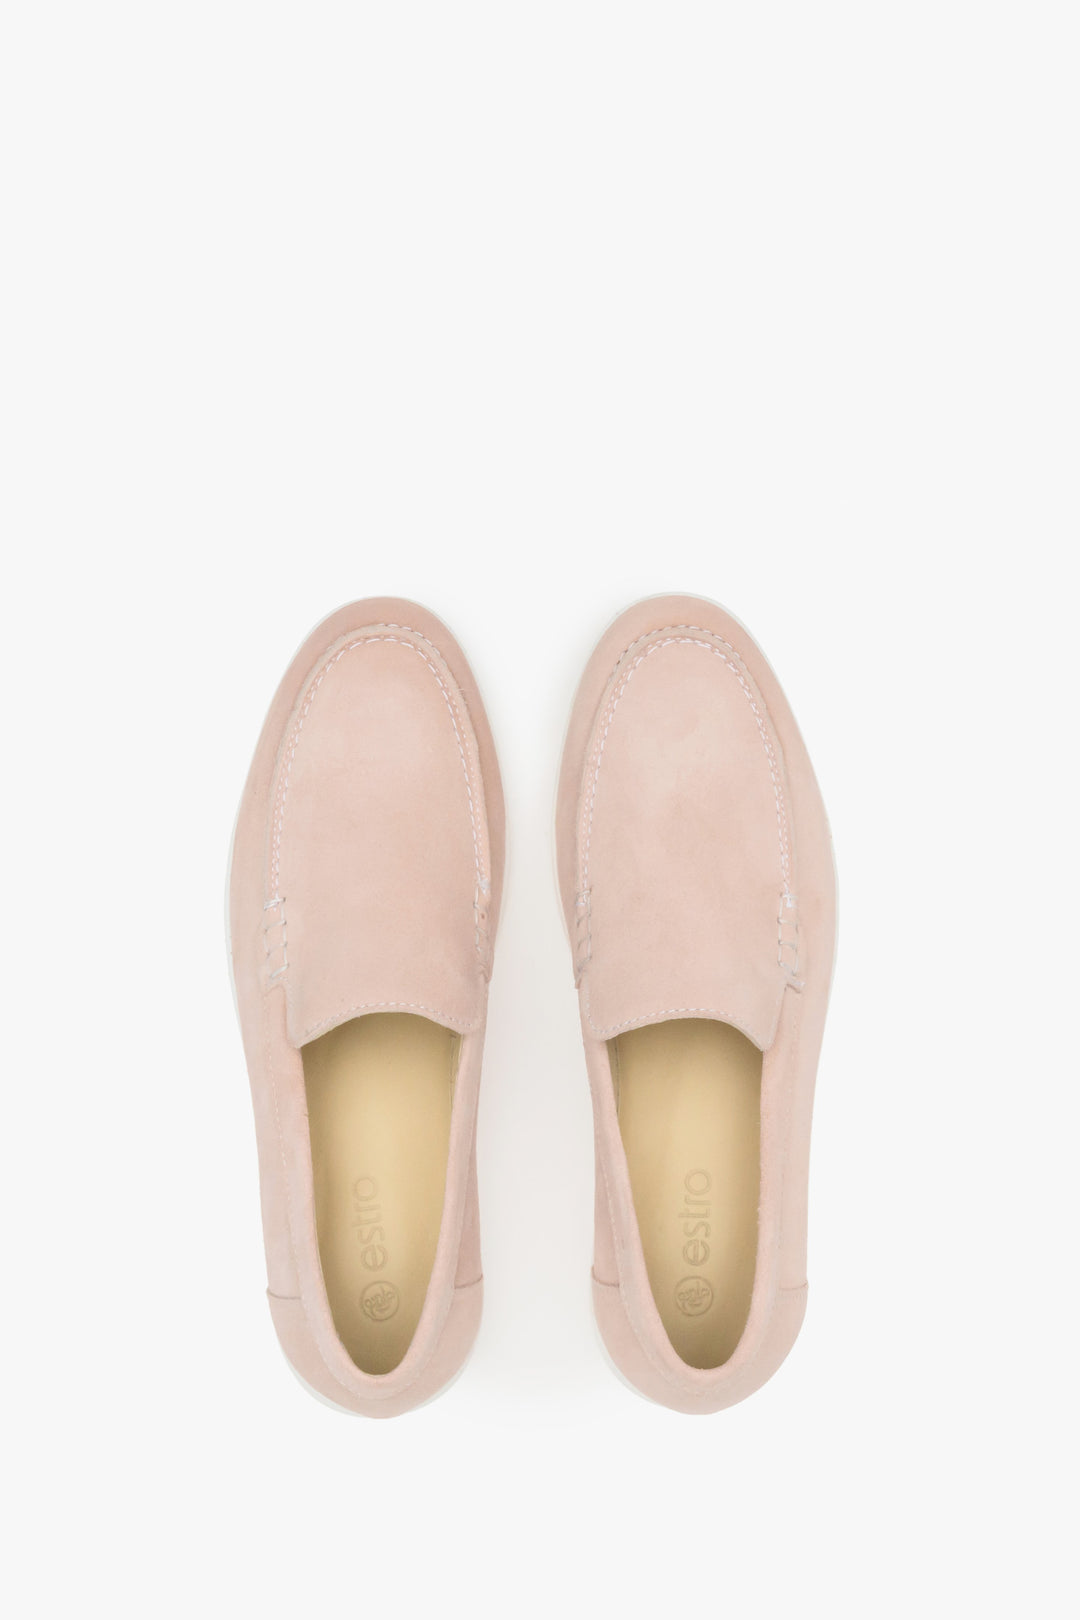 Women's suede moccasins in light pink Estro - presentation of footwear from above.